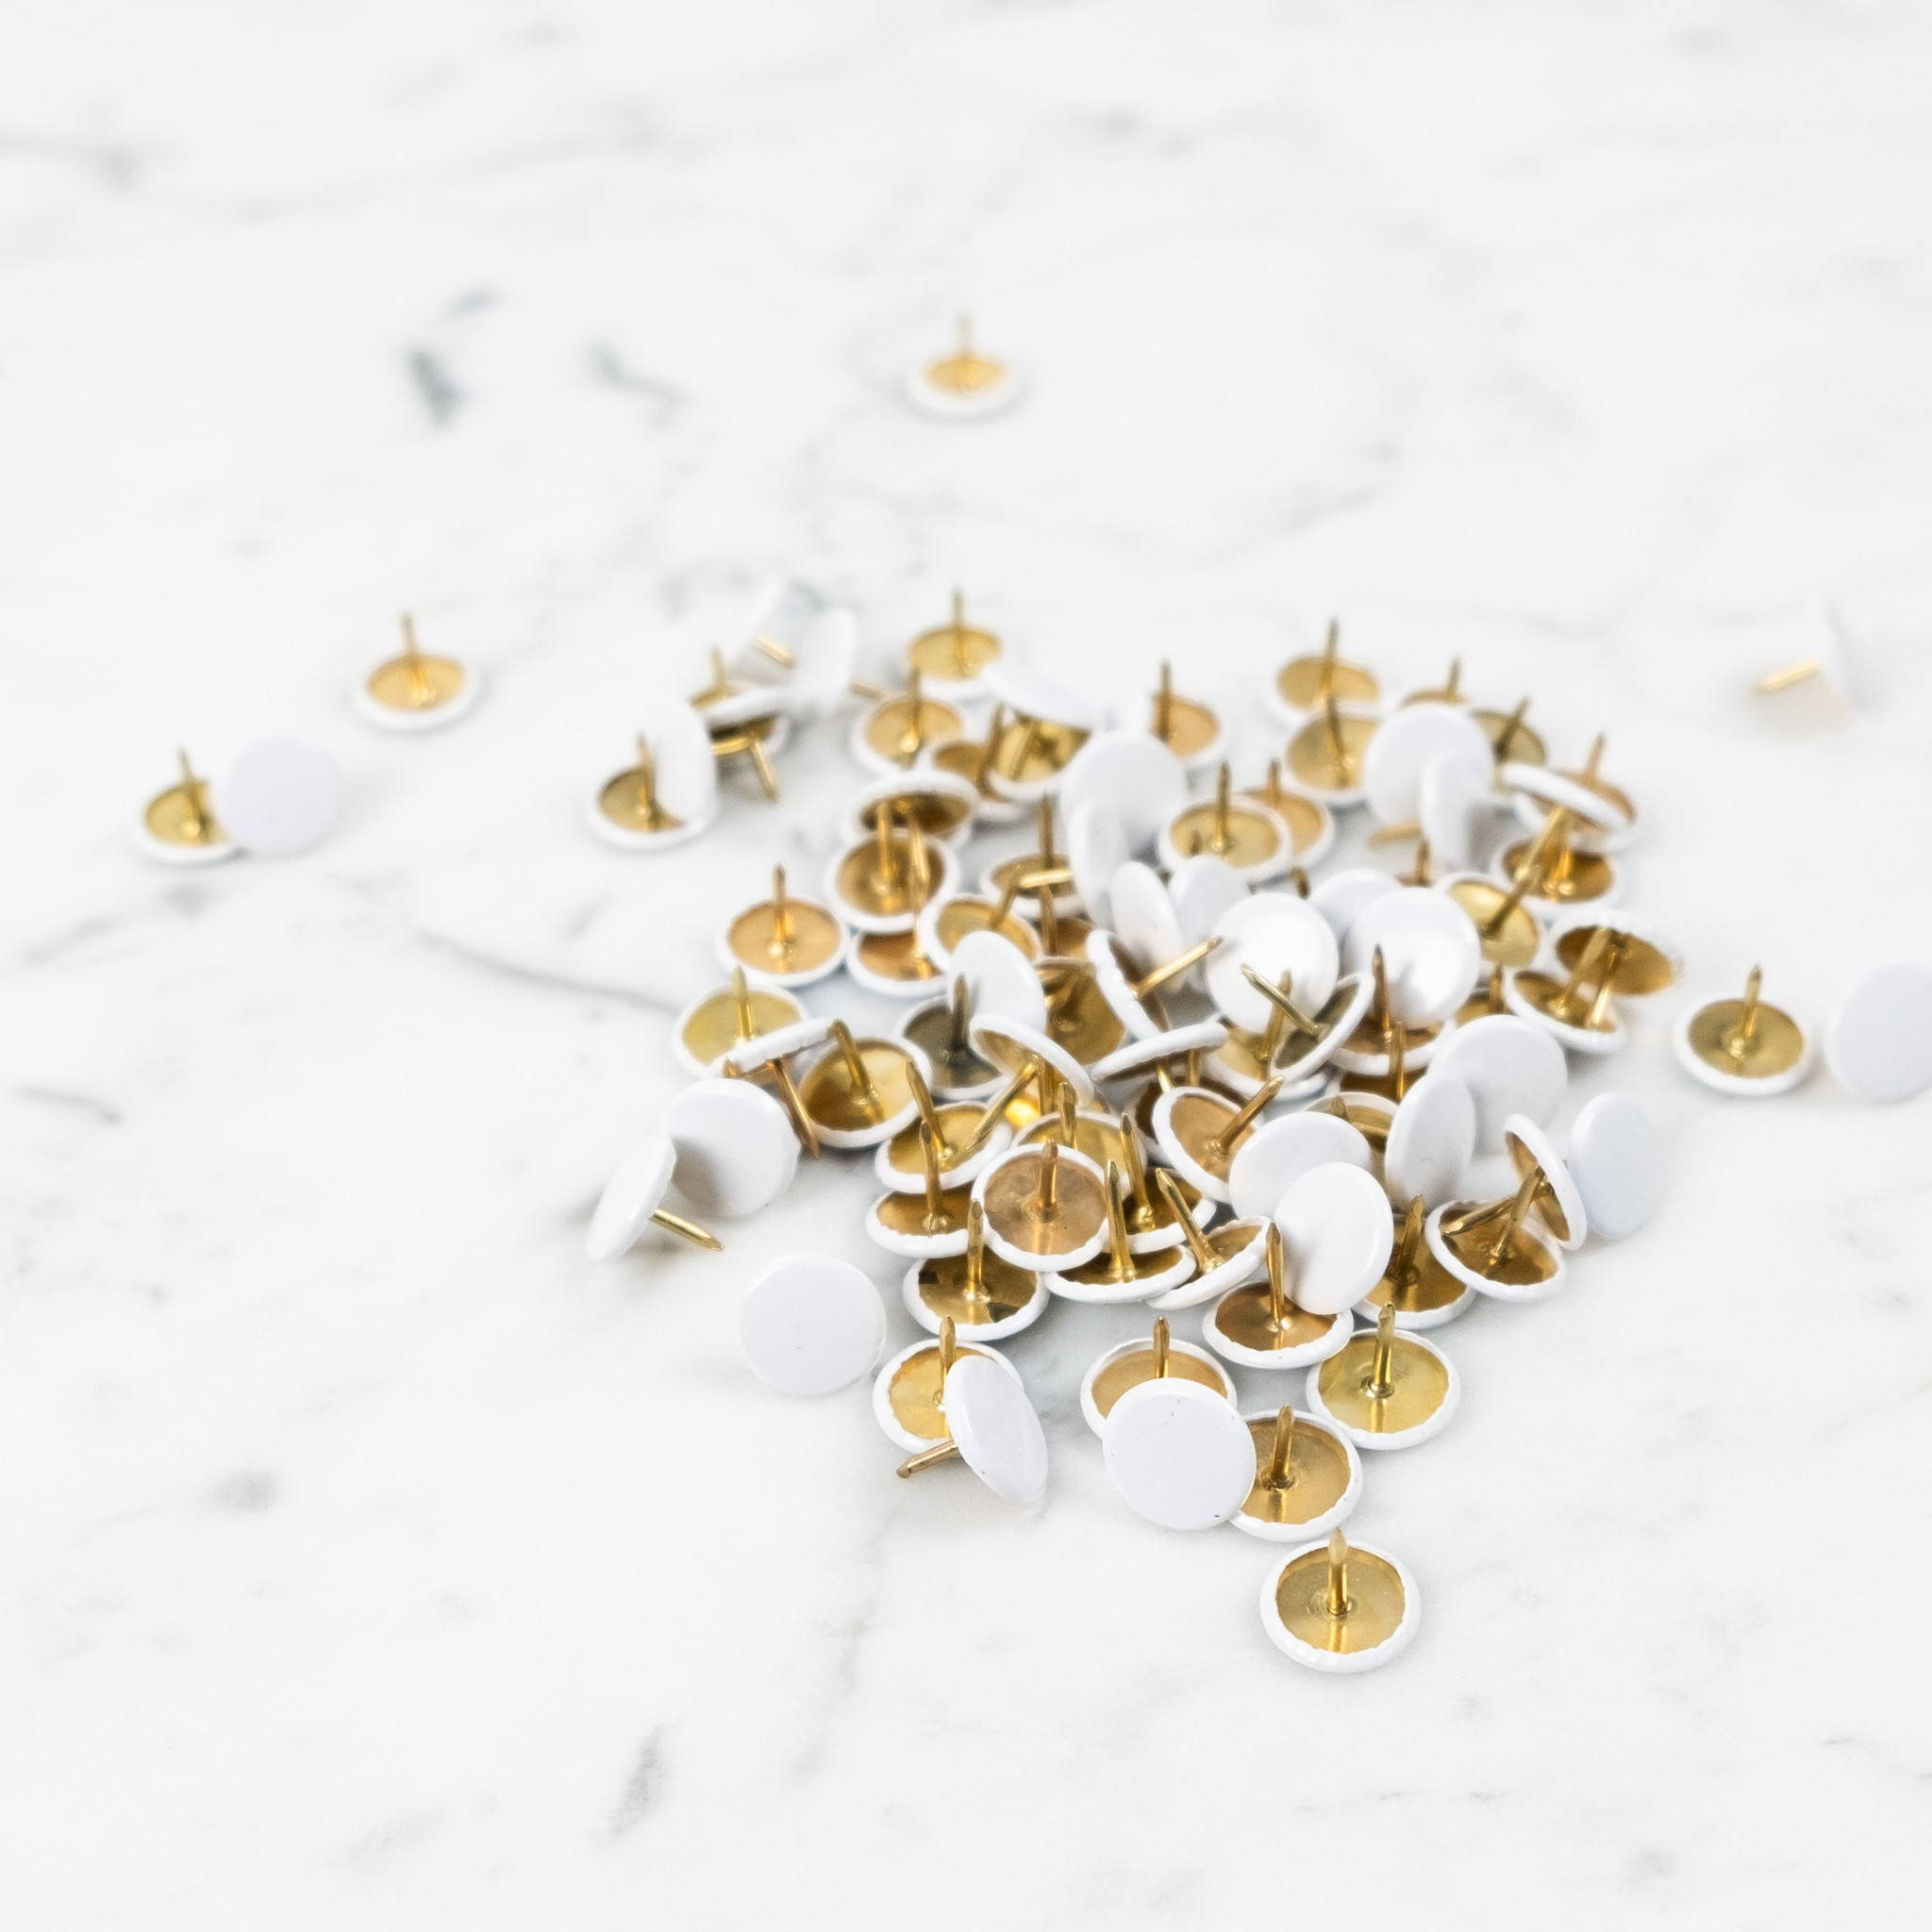 Leone Puntine Blanche Pushpins - White - Box of 100 - The Foundry Home Goods